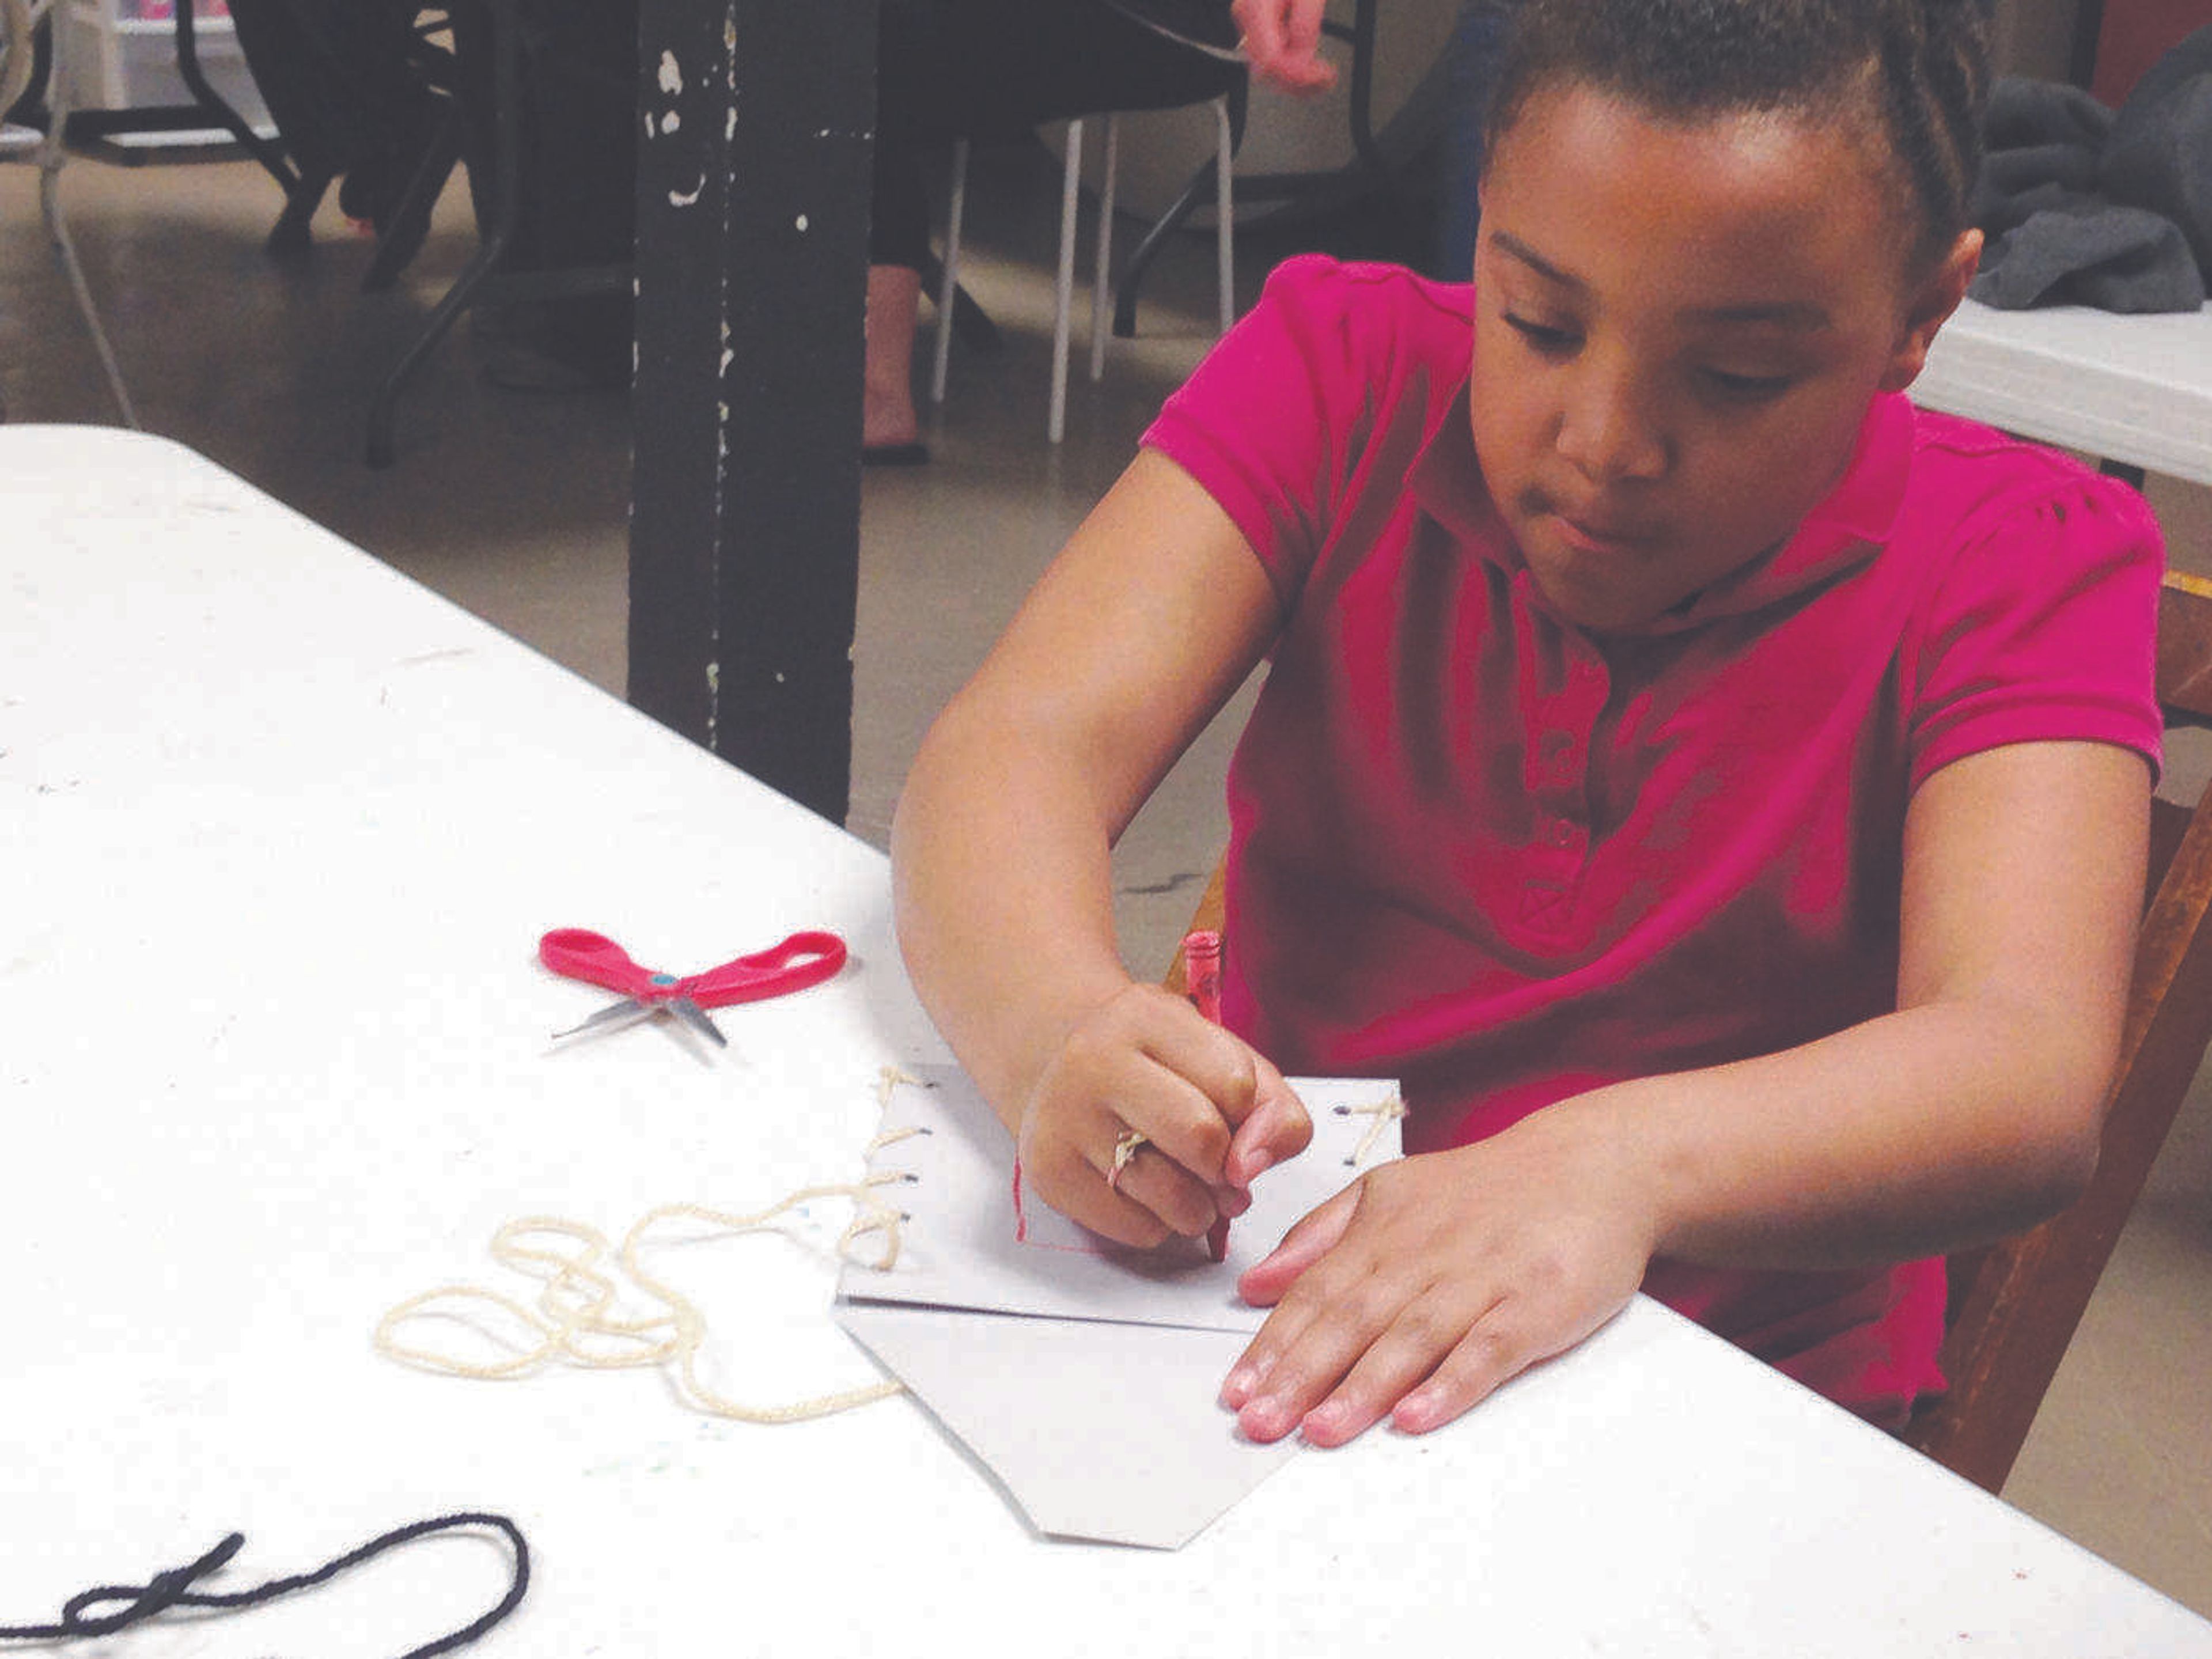 Art program 'reaches' out to local youth